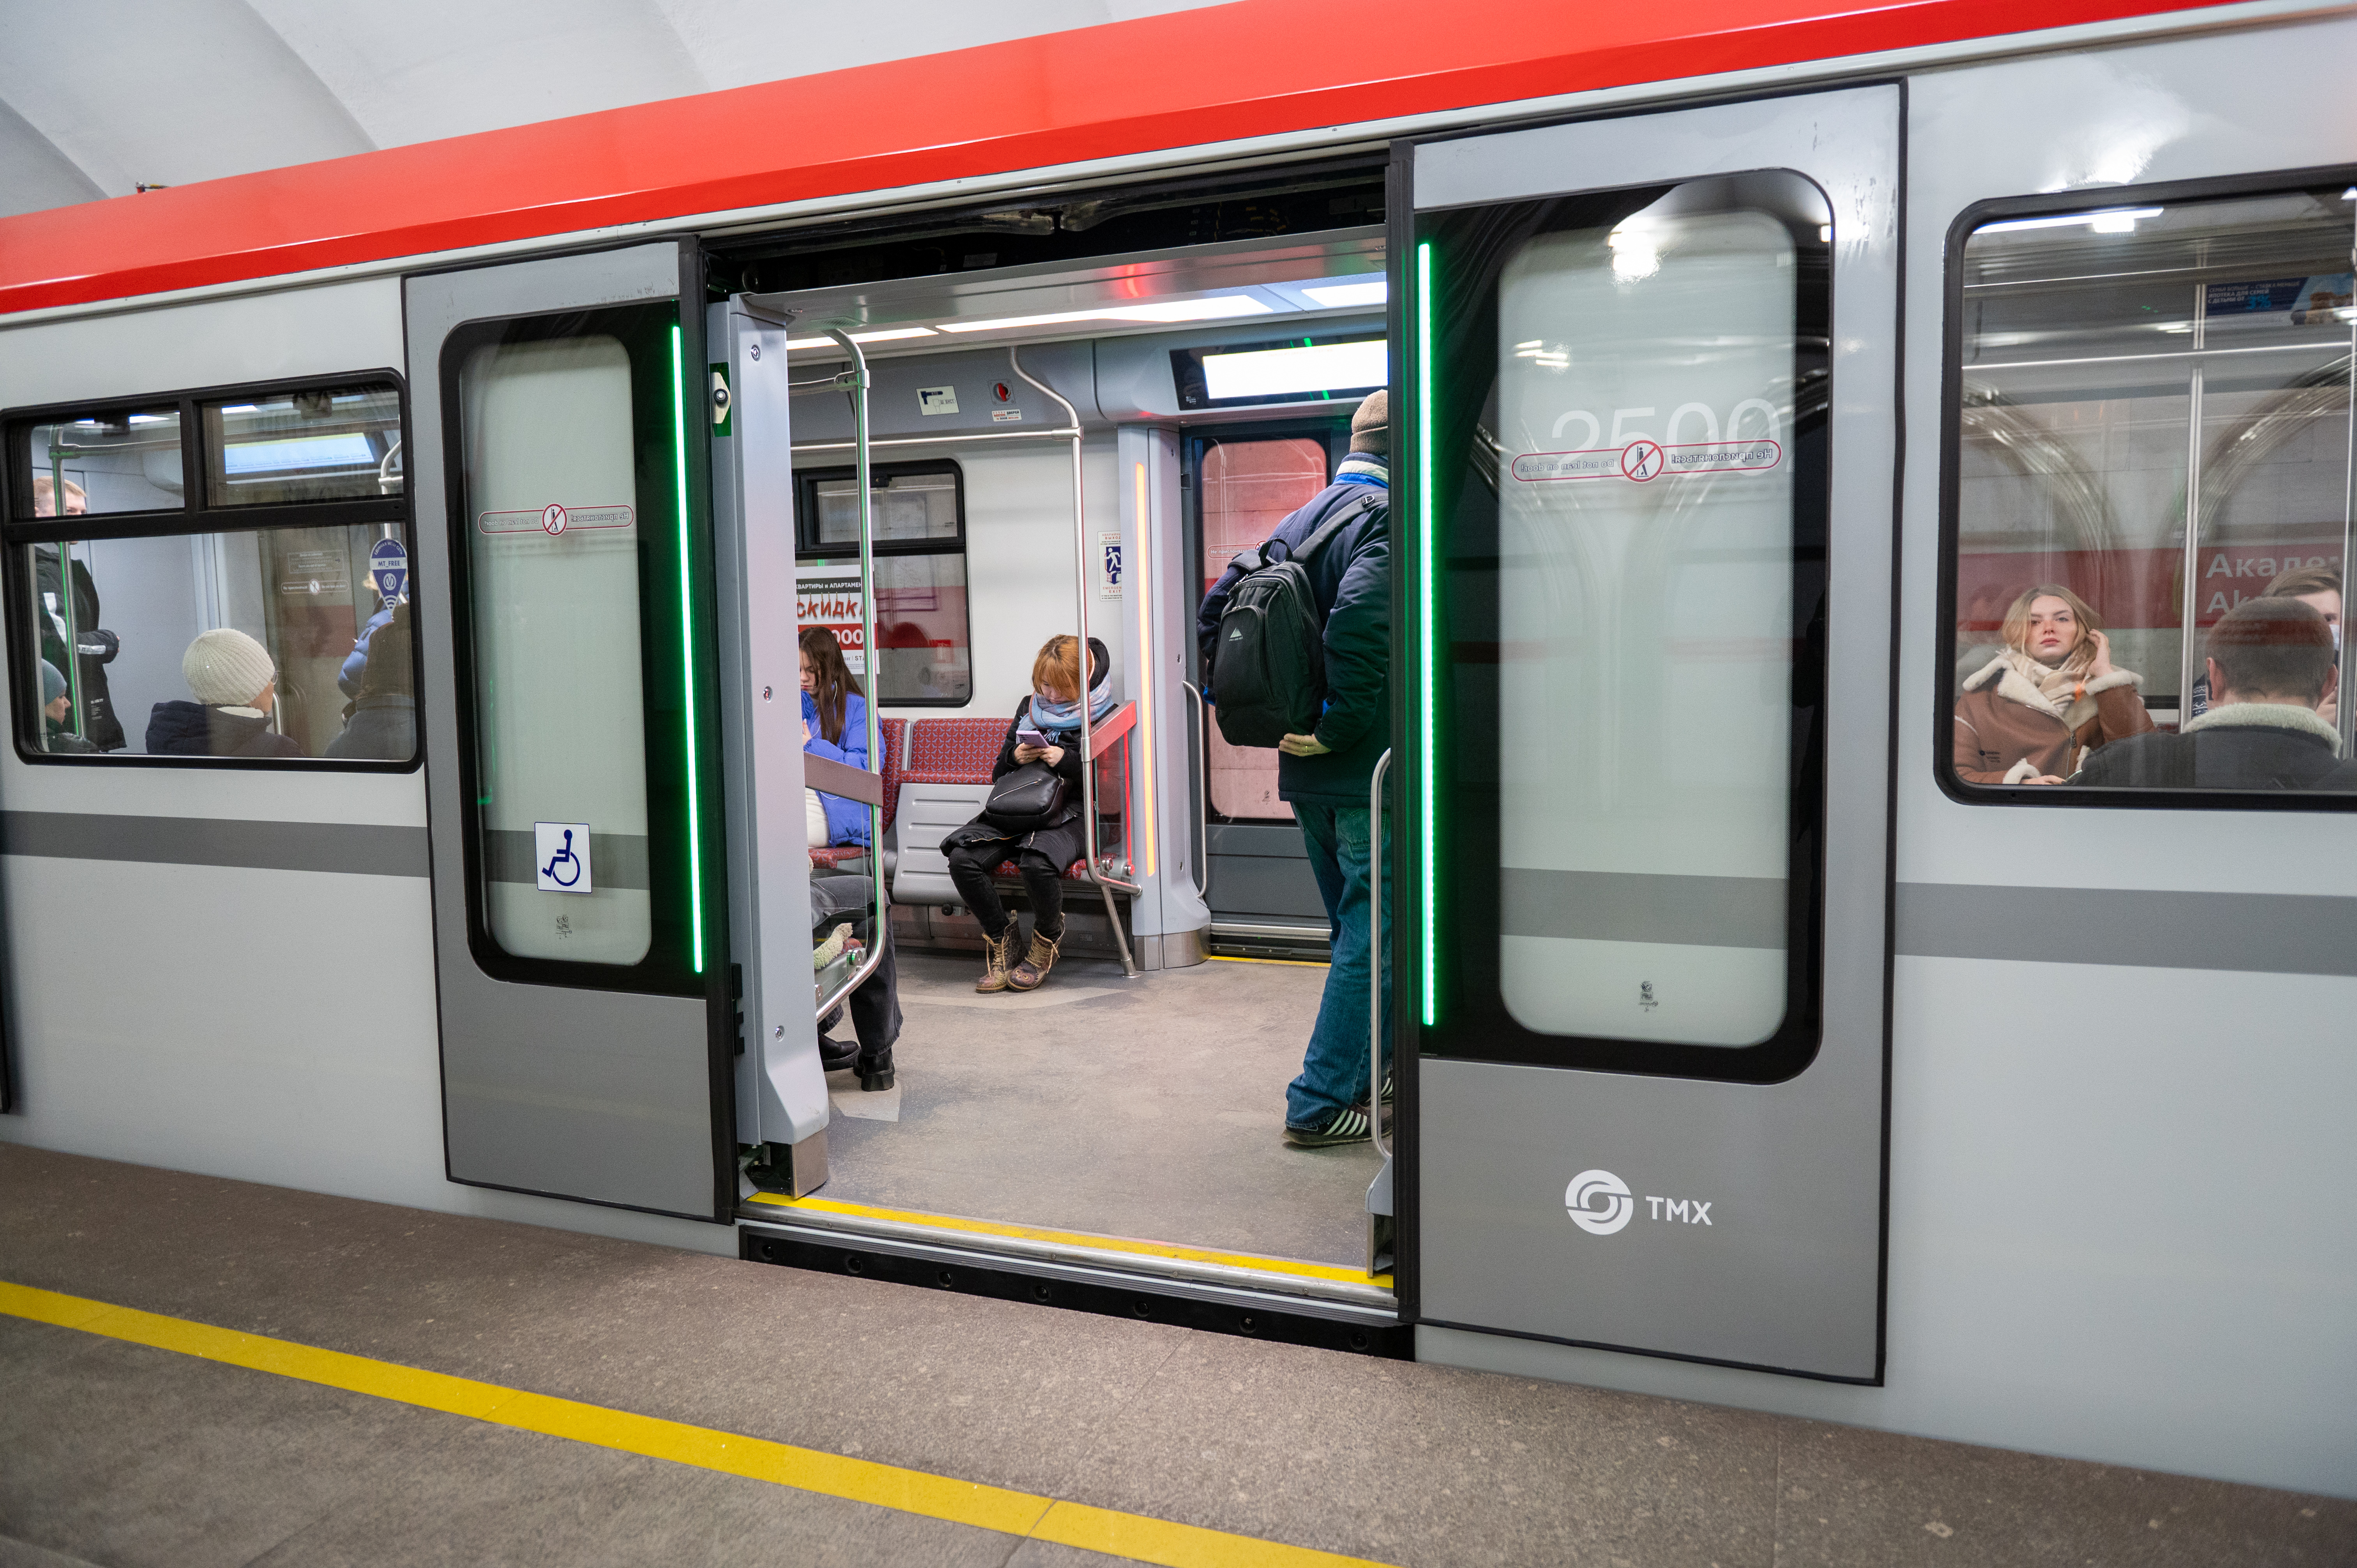 Sliding plug doors with LED lightning in Baltiets metro trains 81-725.1/726.1/727.1